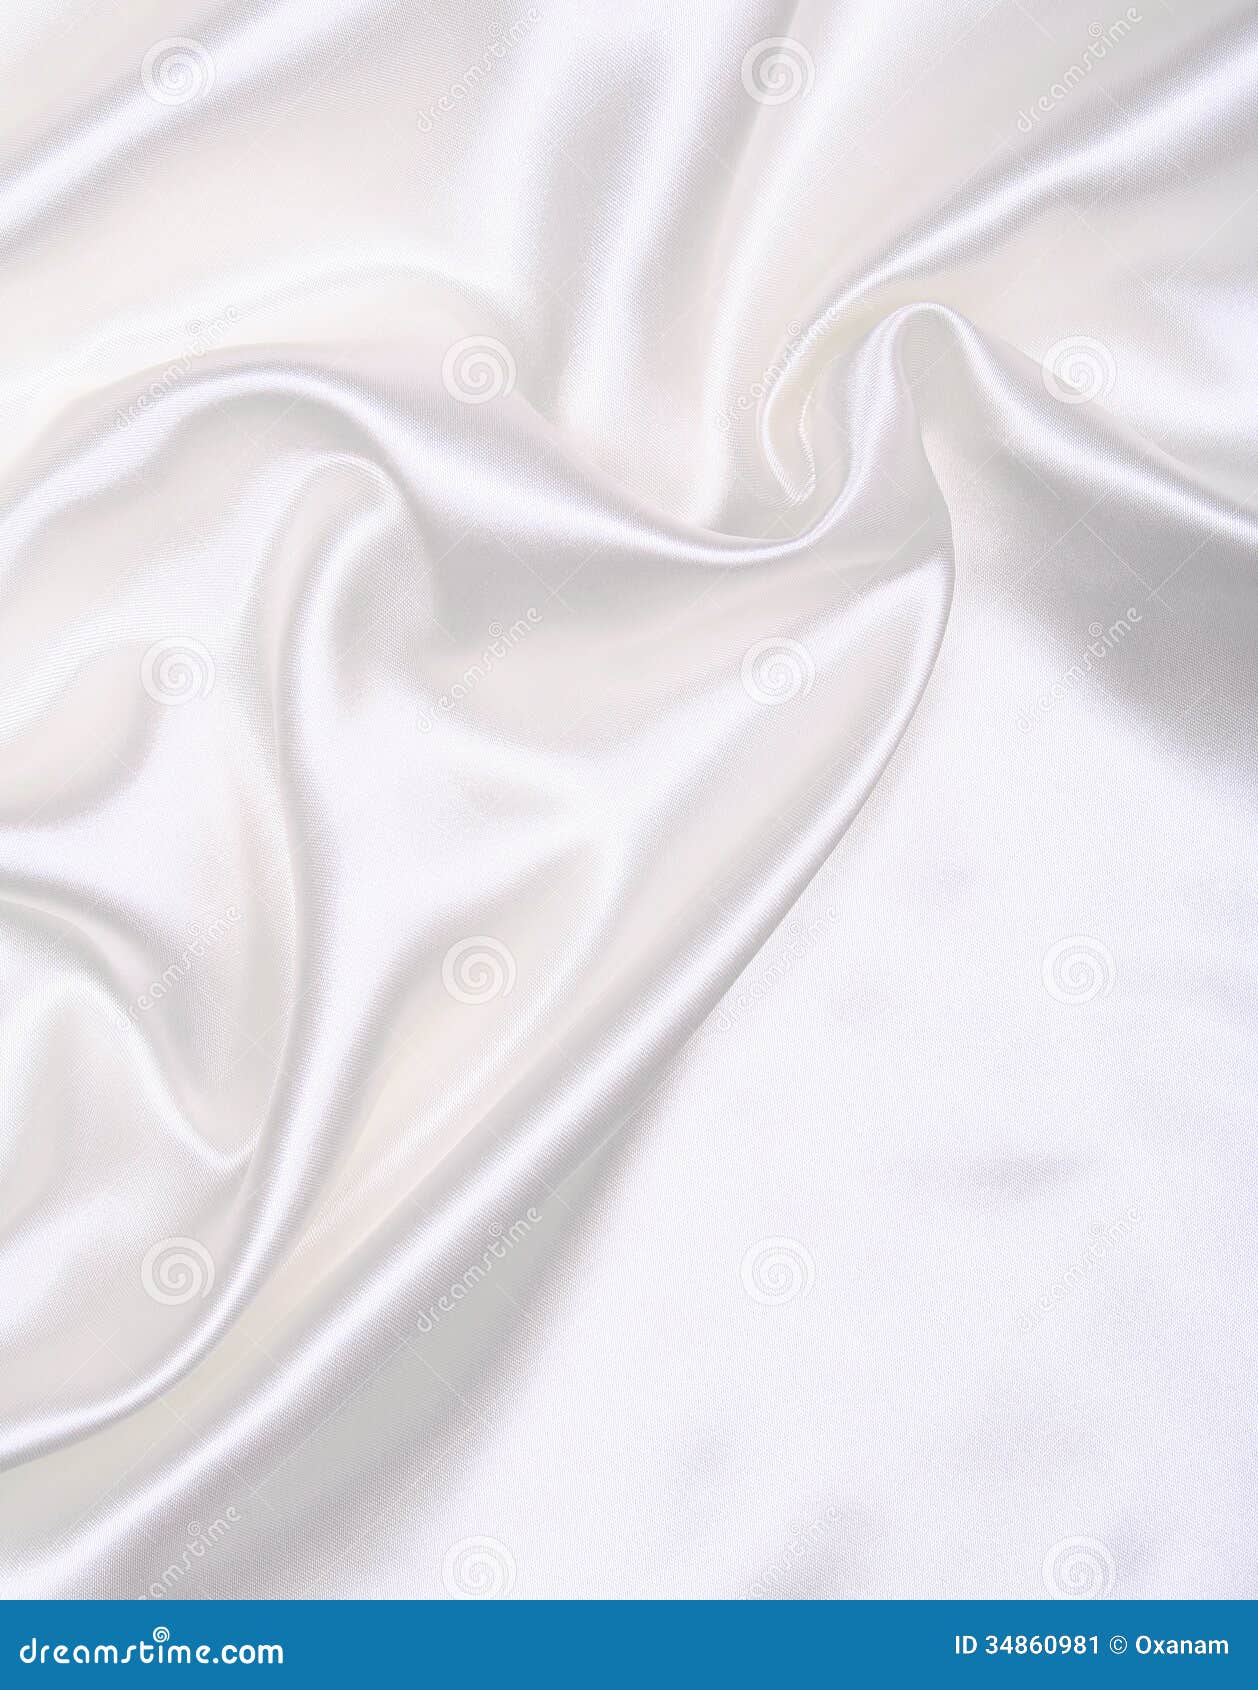 Smooth Elegant White Silk As Background Stock Image Image Of Silvery Backdrop